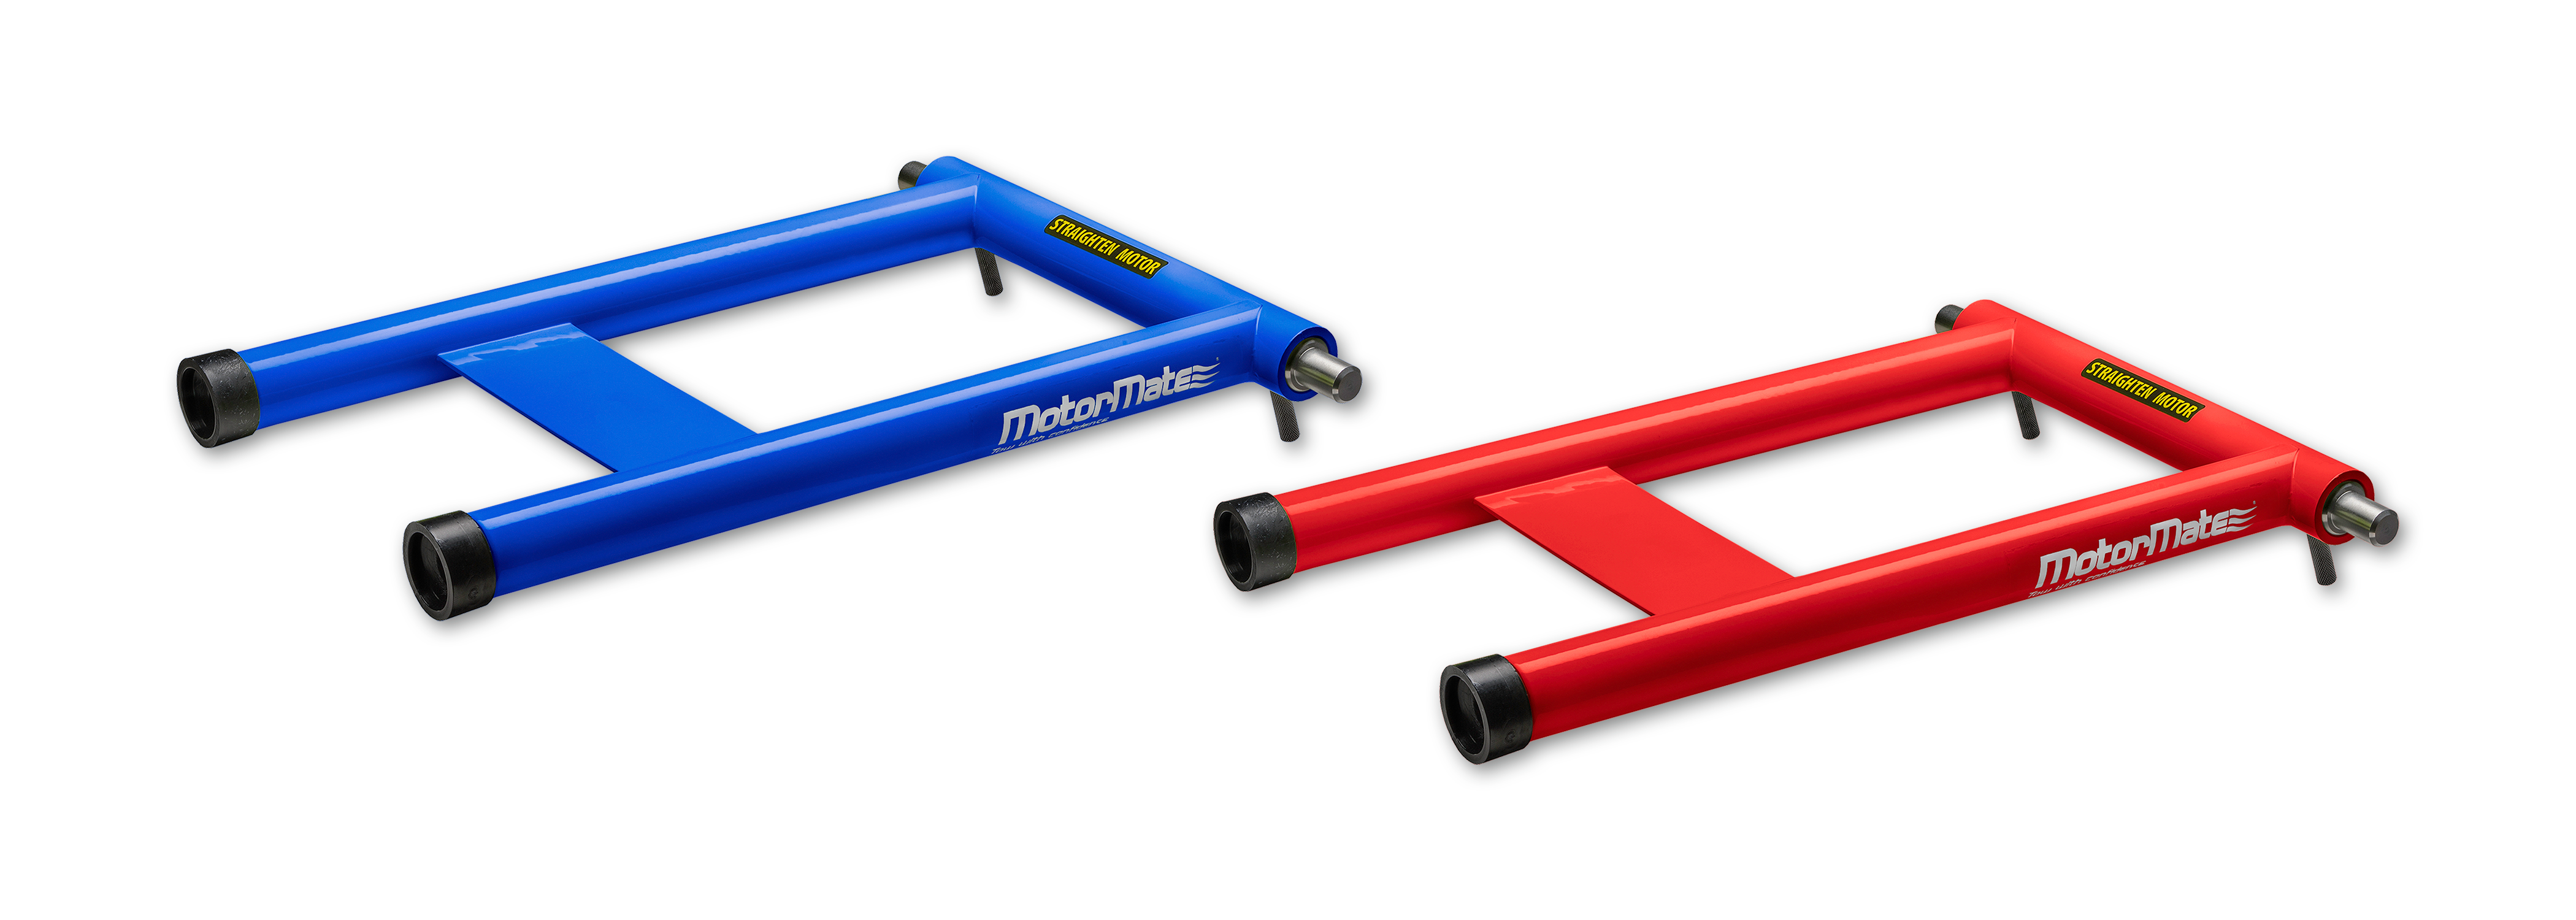 Outboard Motor Stabilizing Systems<br>
MotorMate<br>	
$115.95 - $129.95.<br>	
MotorMateâs new colors are now available in Red and Blue for the Yamaha 4-stroke 115HP â 250HP SHO motors.  MotorMate is made in the USA using marine-grade stainless steel and has high-impact nylon end caps.  MotorMate comes with a lifetime warranty and is used by several top fishing professionals.  
